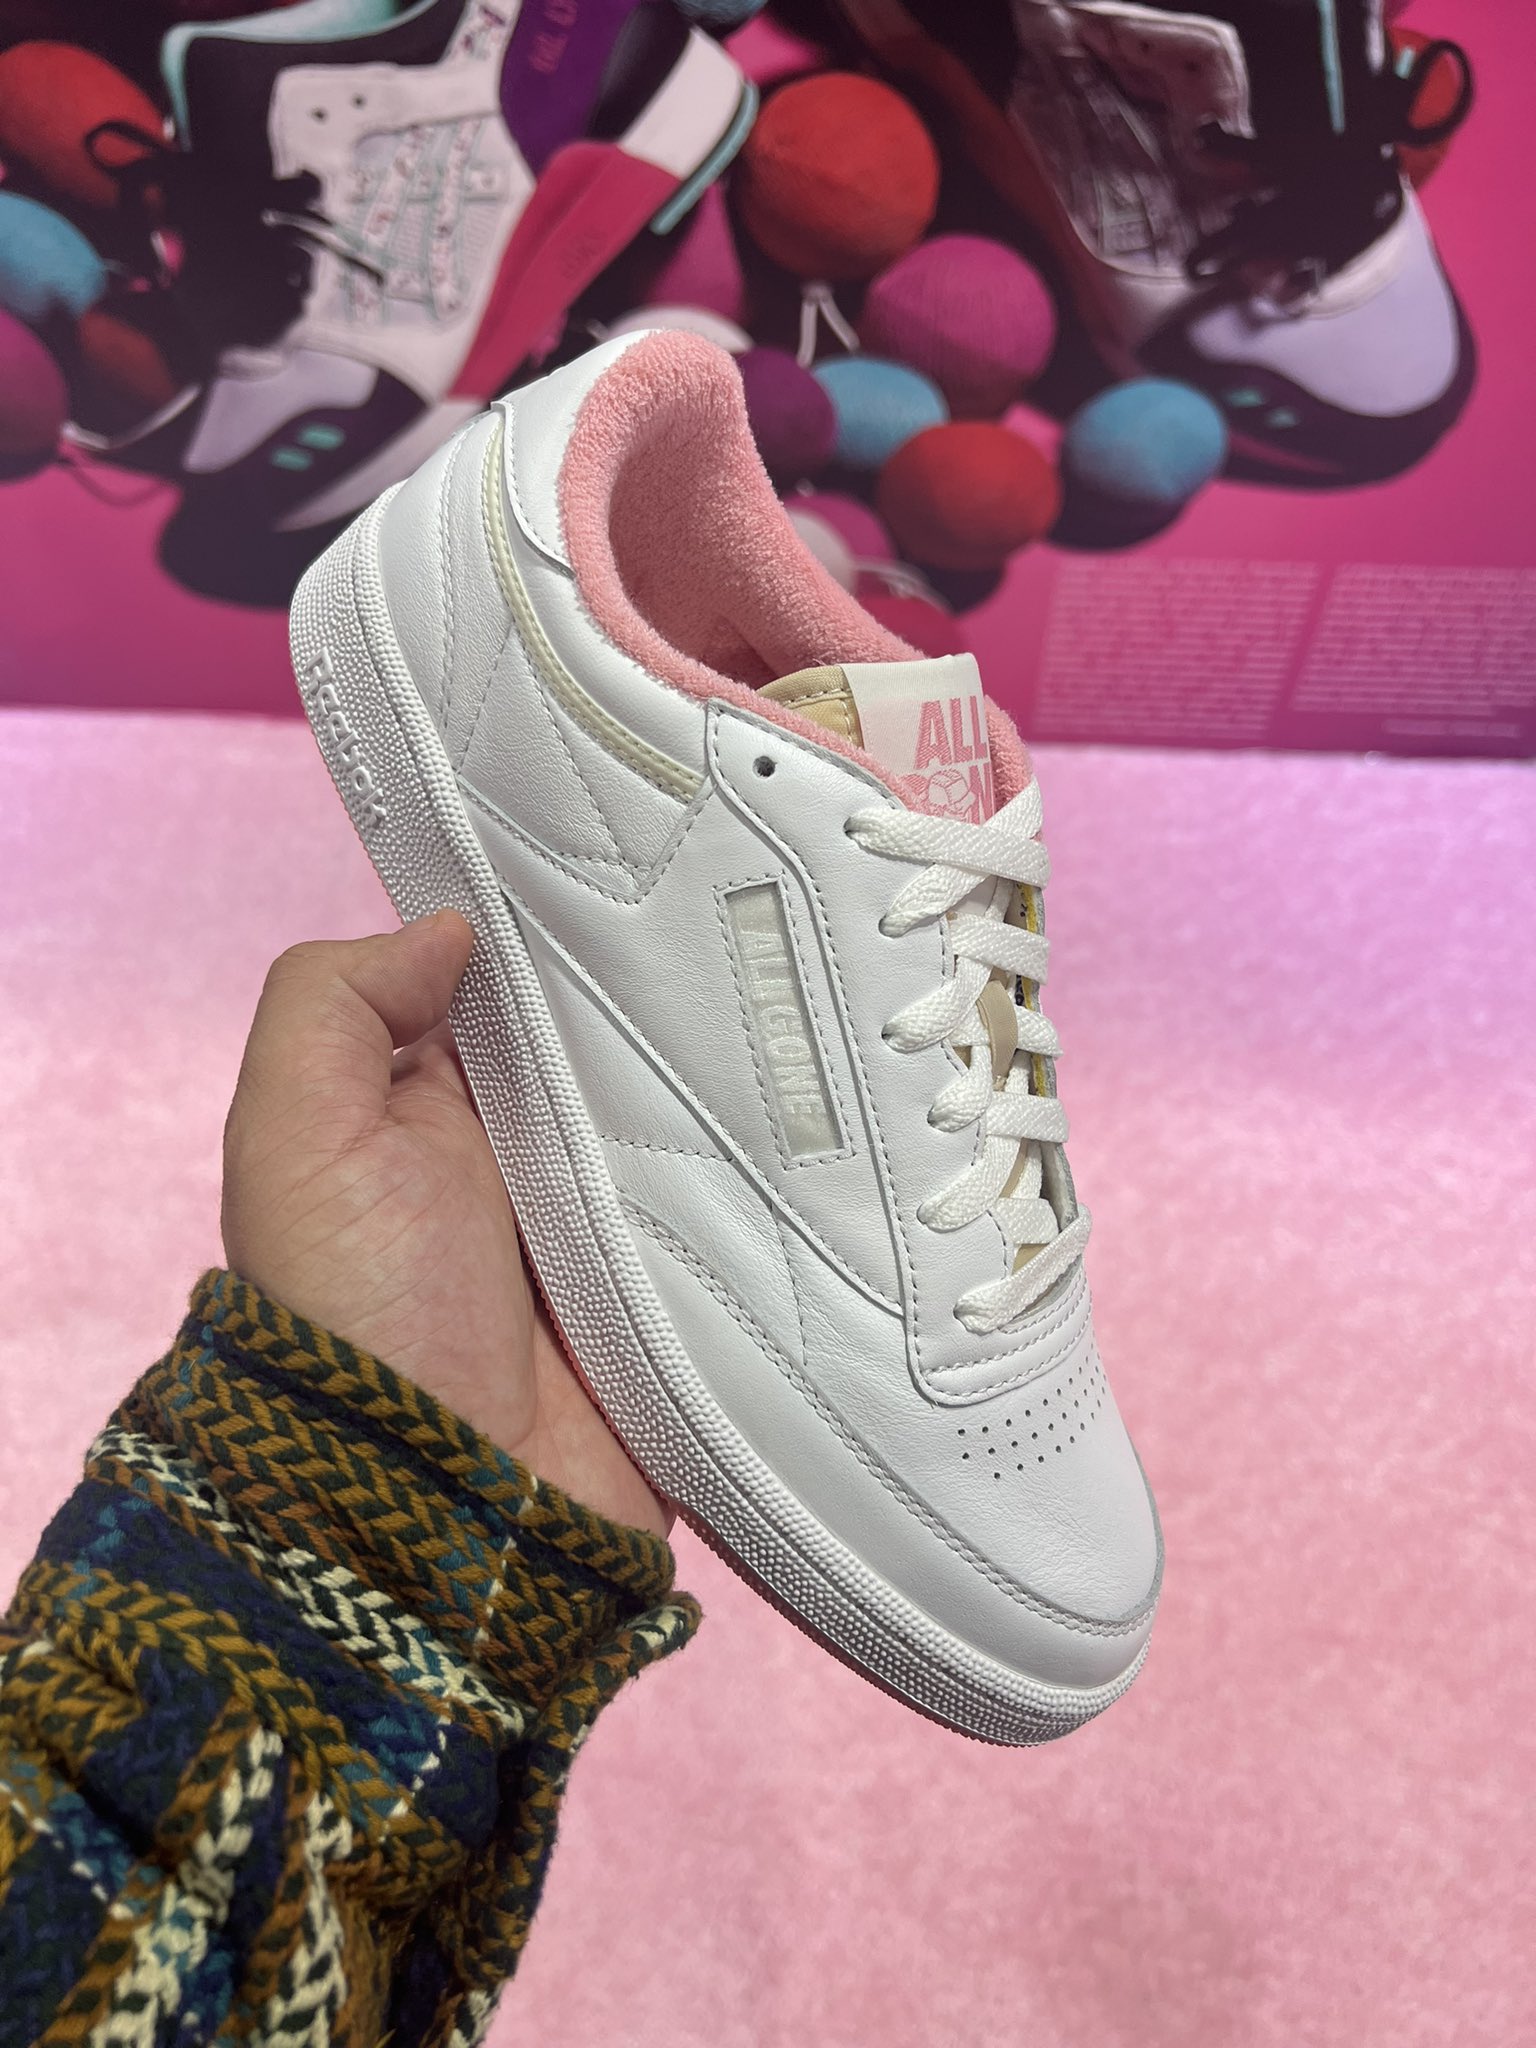 Tilslutte inkompetence henvise Complex Sneakers på X: ".@PaperBoyParis x Reebok Club C "All Gone" dropping  now at #ComplexCon https://t.co/md3O8HZBaA" / X